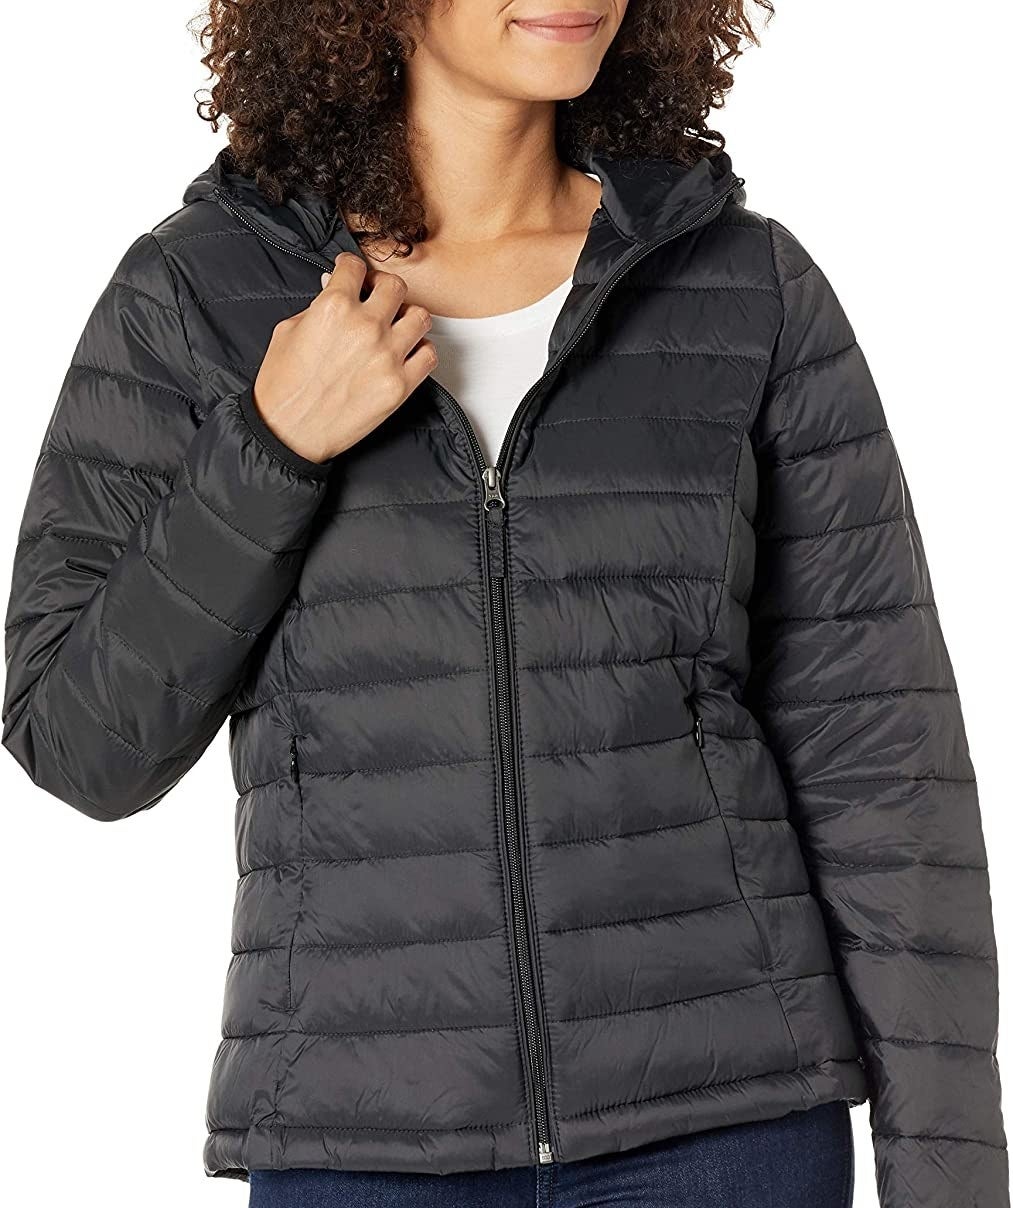 a person wearing the packable puffer jacket